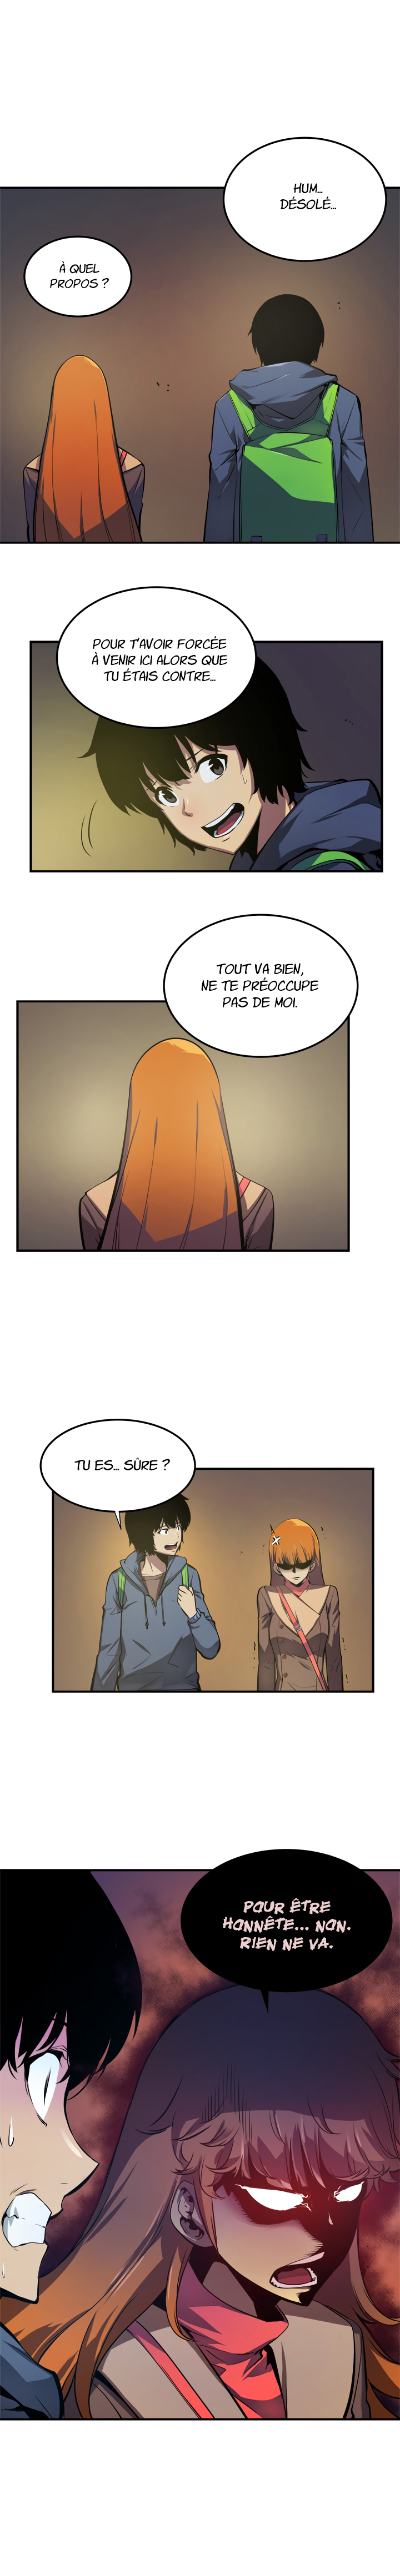 Solo Leveling: Chapter chapitre-3 - Page 2